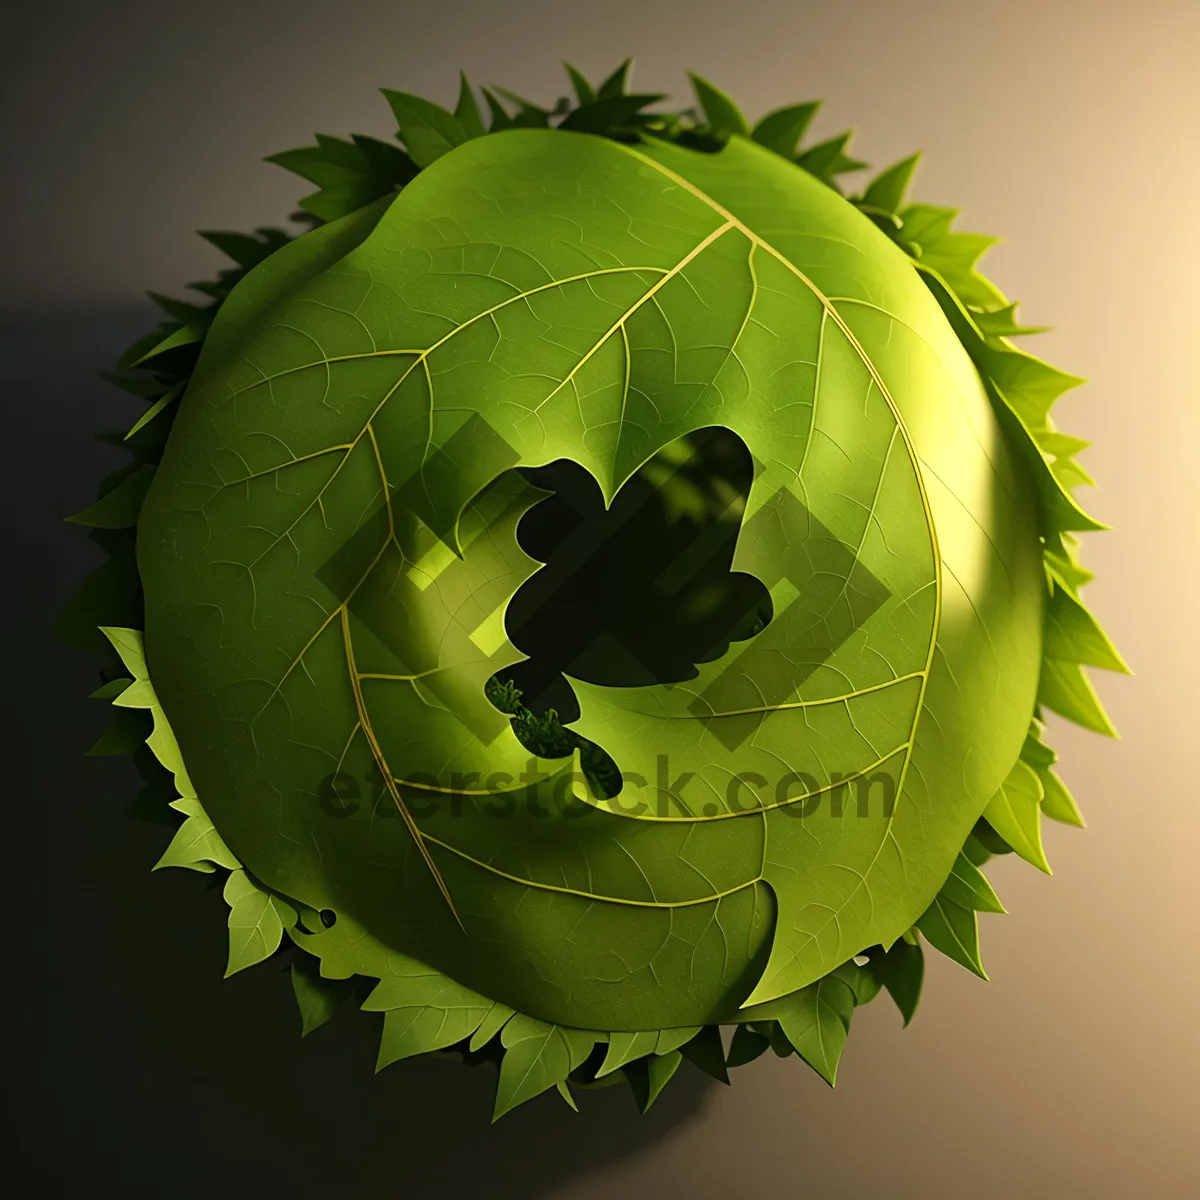 Picture of Earth's vibrant leafy artistry embodied in nature's graphic globe.